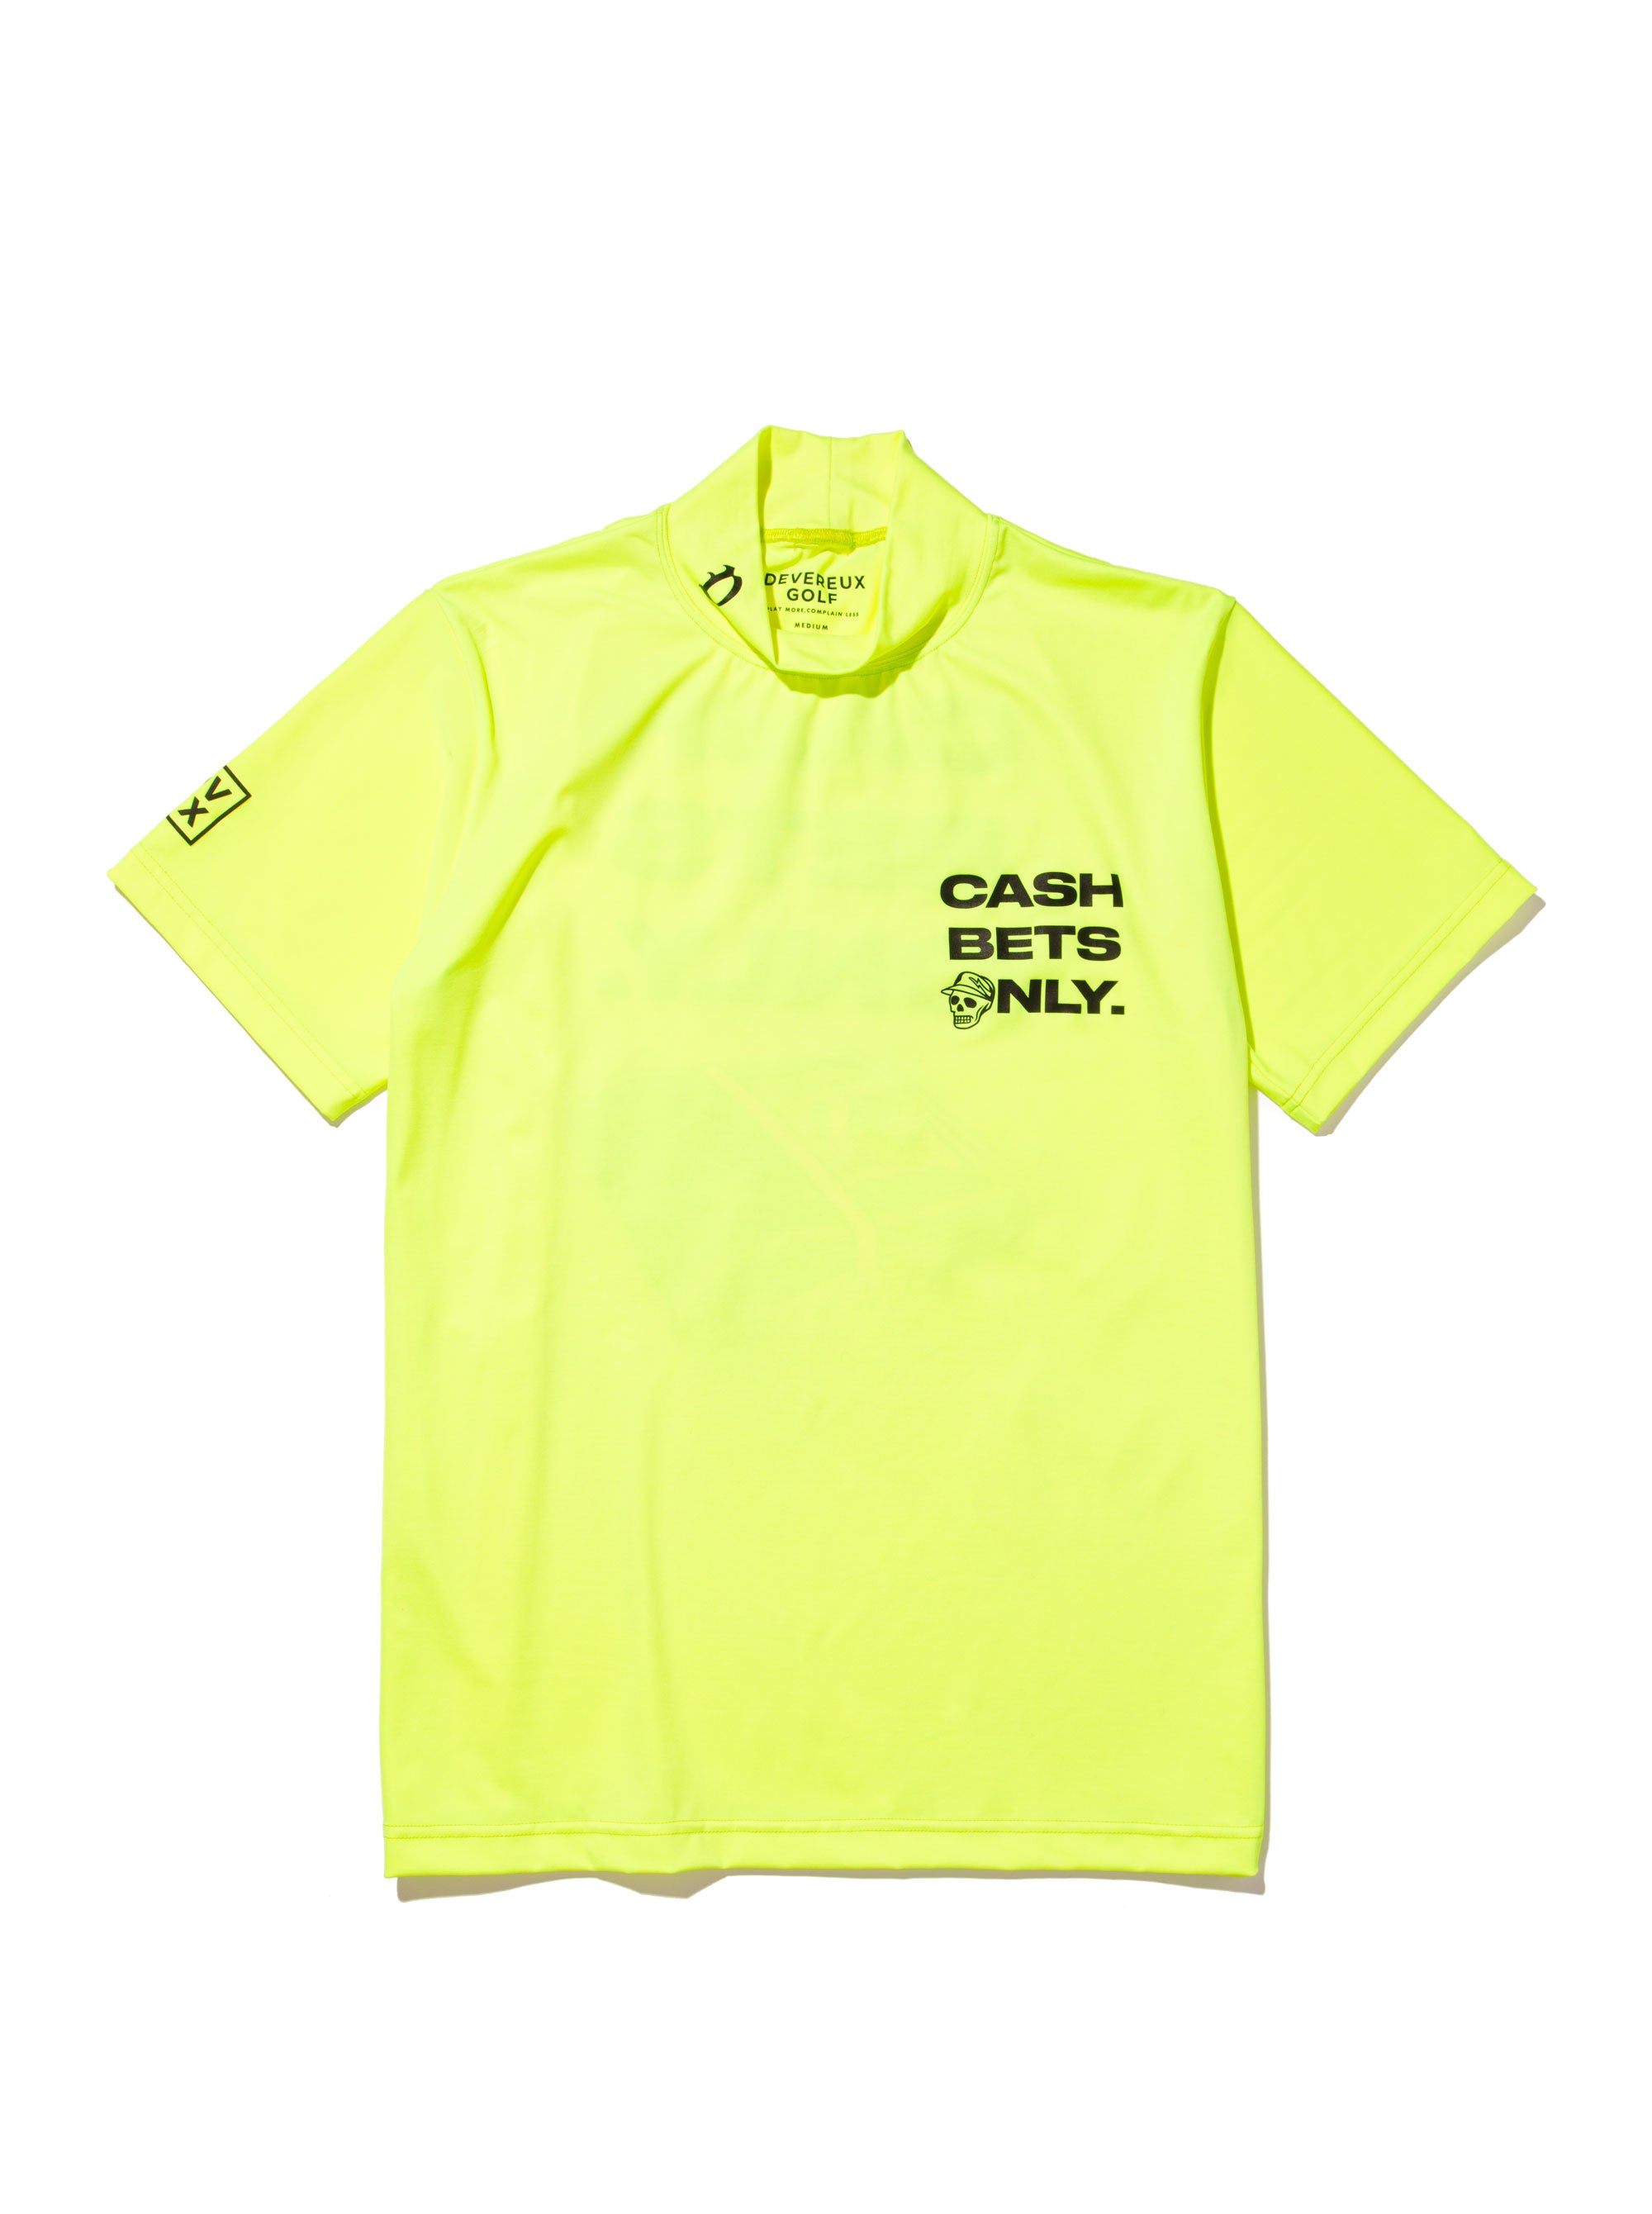 Cash Bets Only 2 Mock Neck Tee 763572001-YELLOW